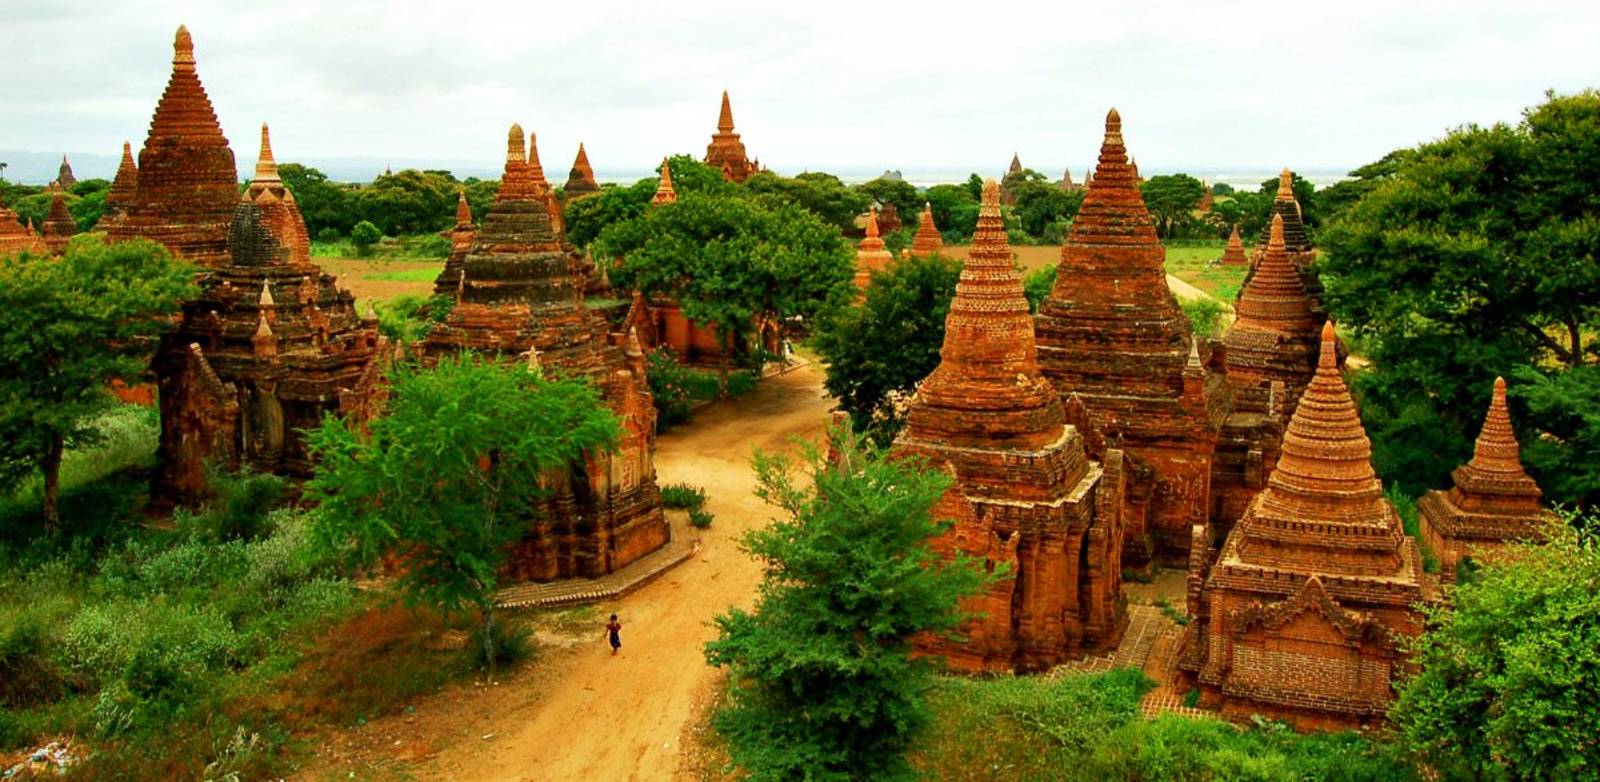 Timeless temples in the ancient capital of Bagan